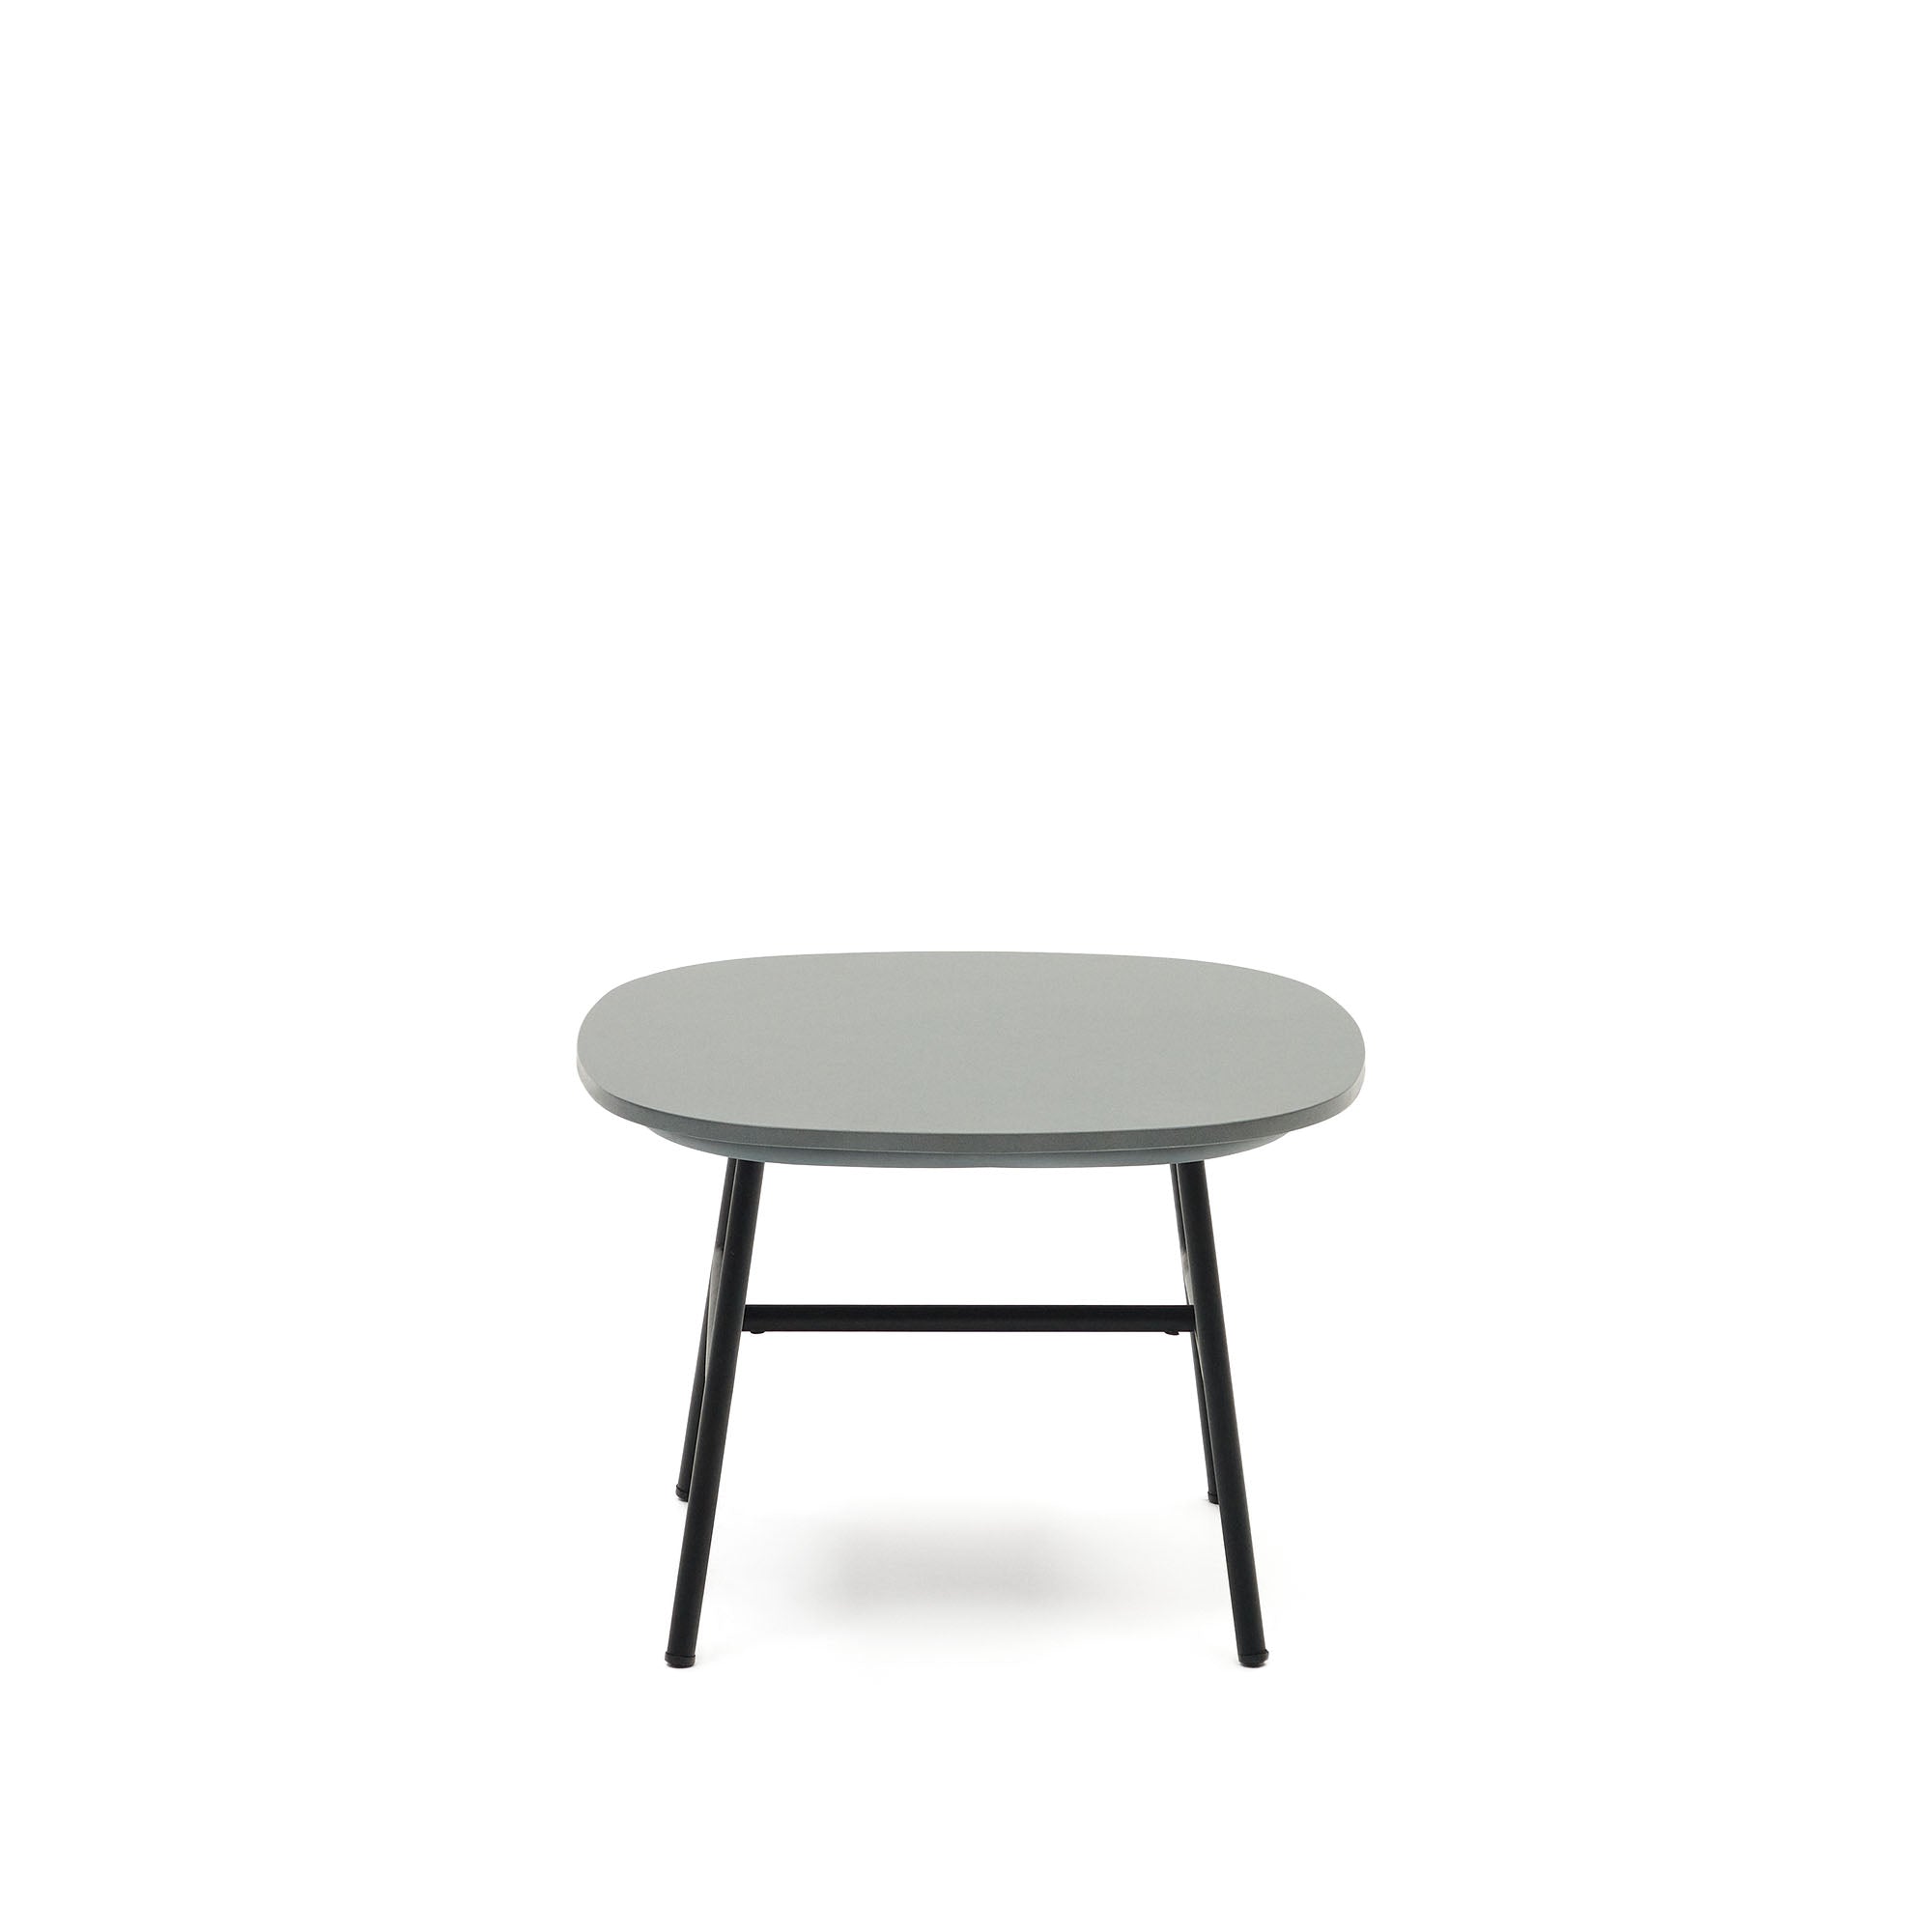 Bramant side table in steel with black finish, 60 x 60 cm